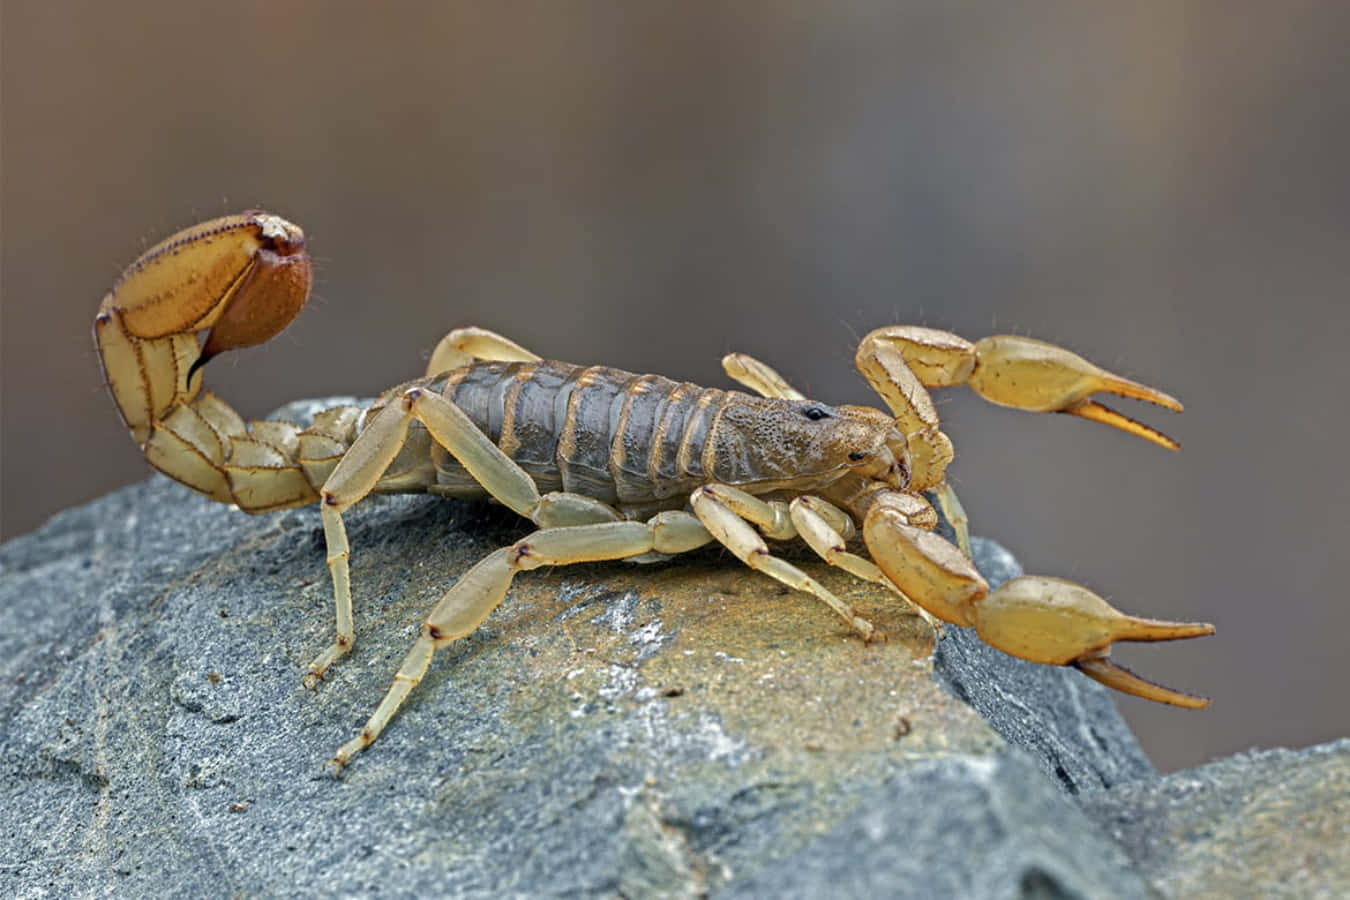 A magnificent scorpion in its brown exoskeleton